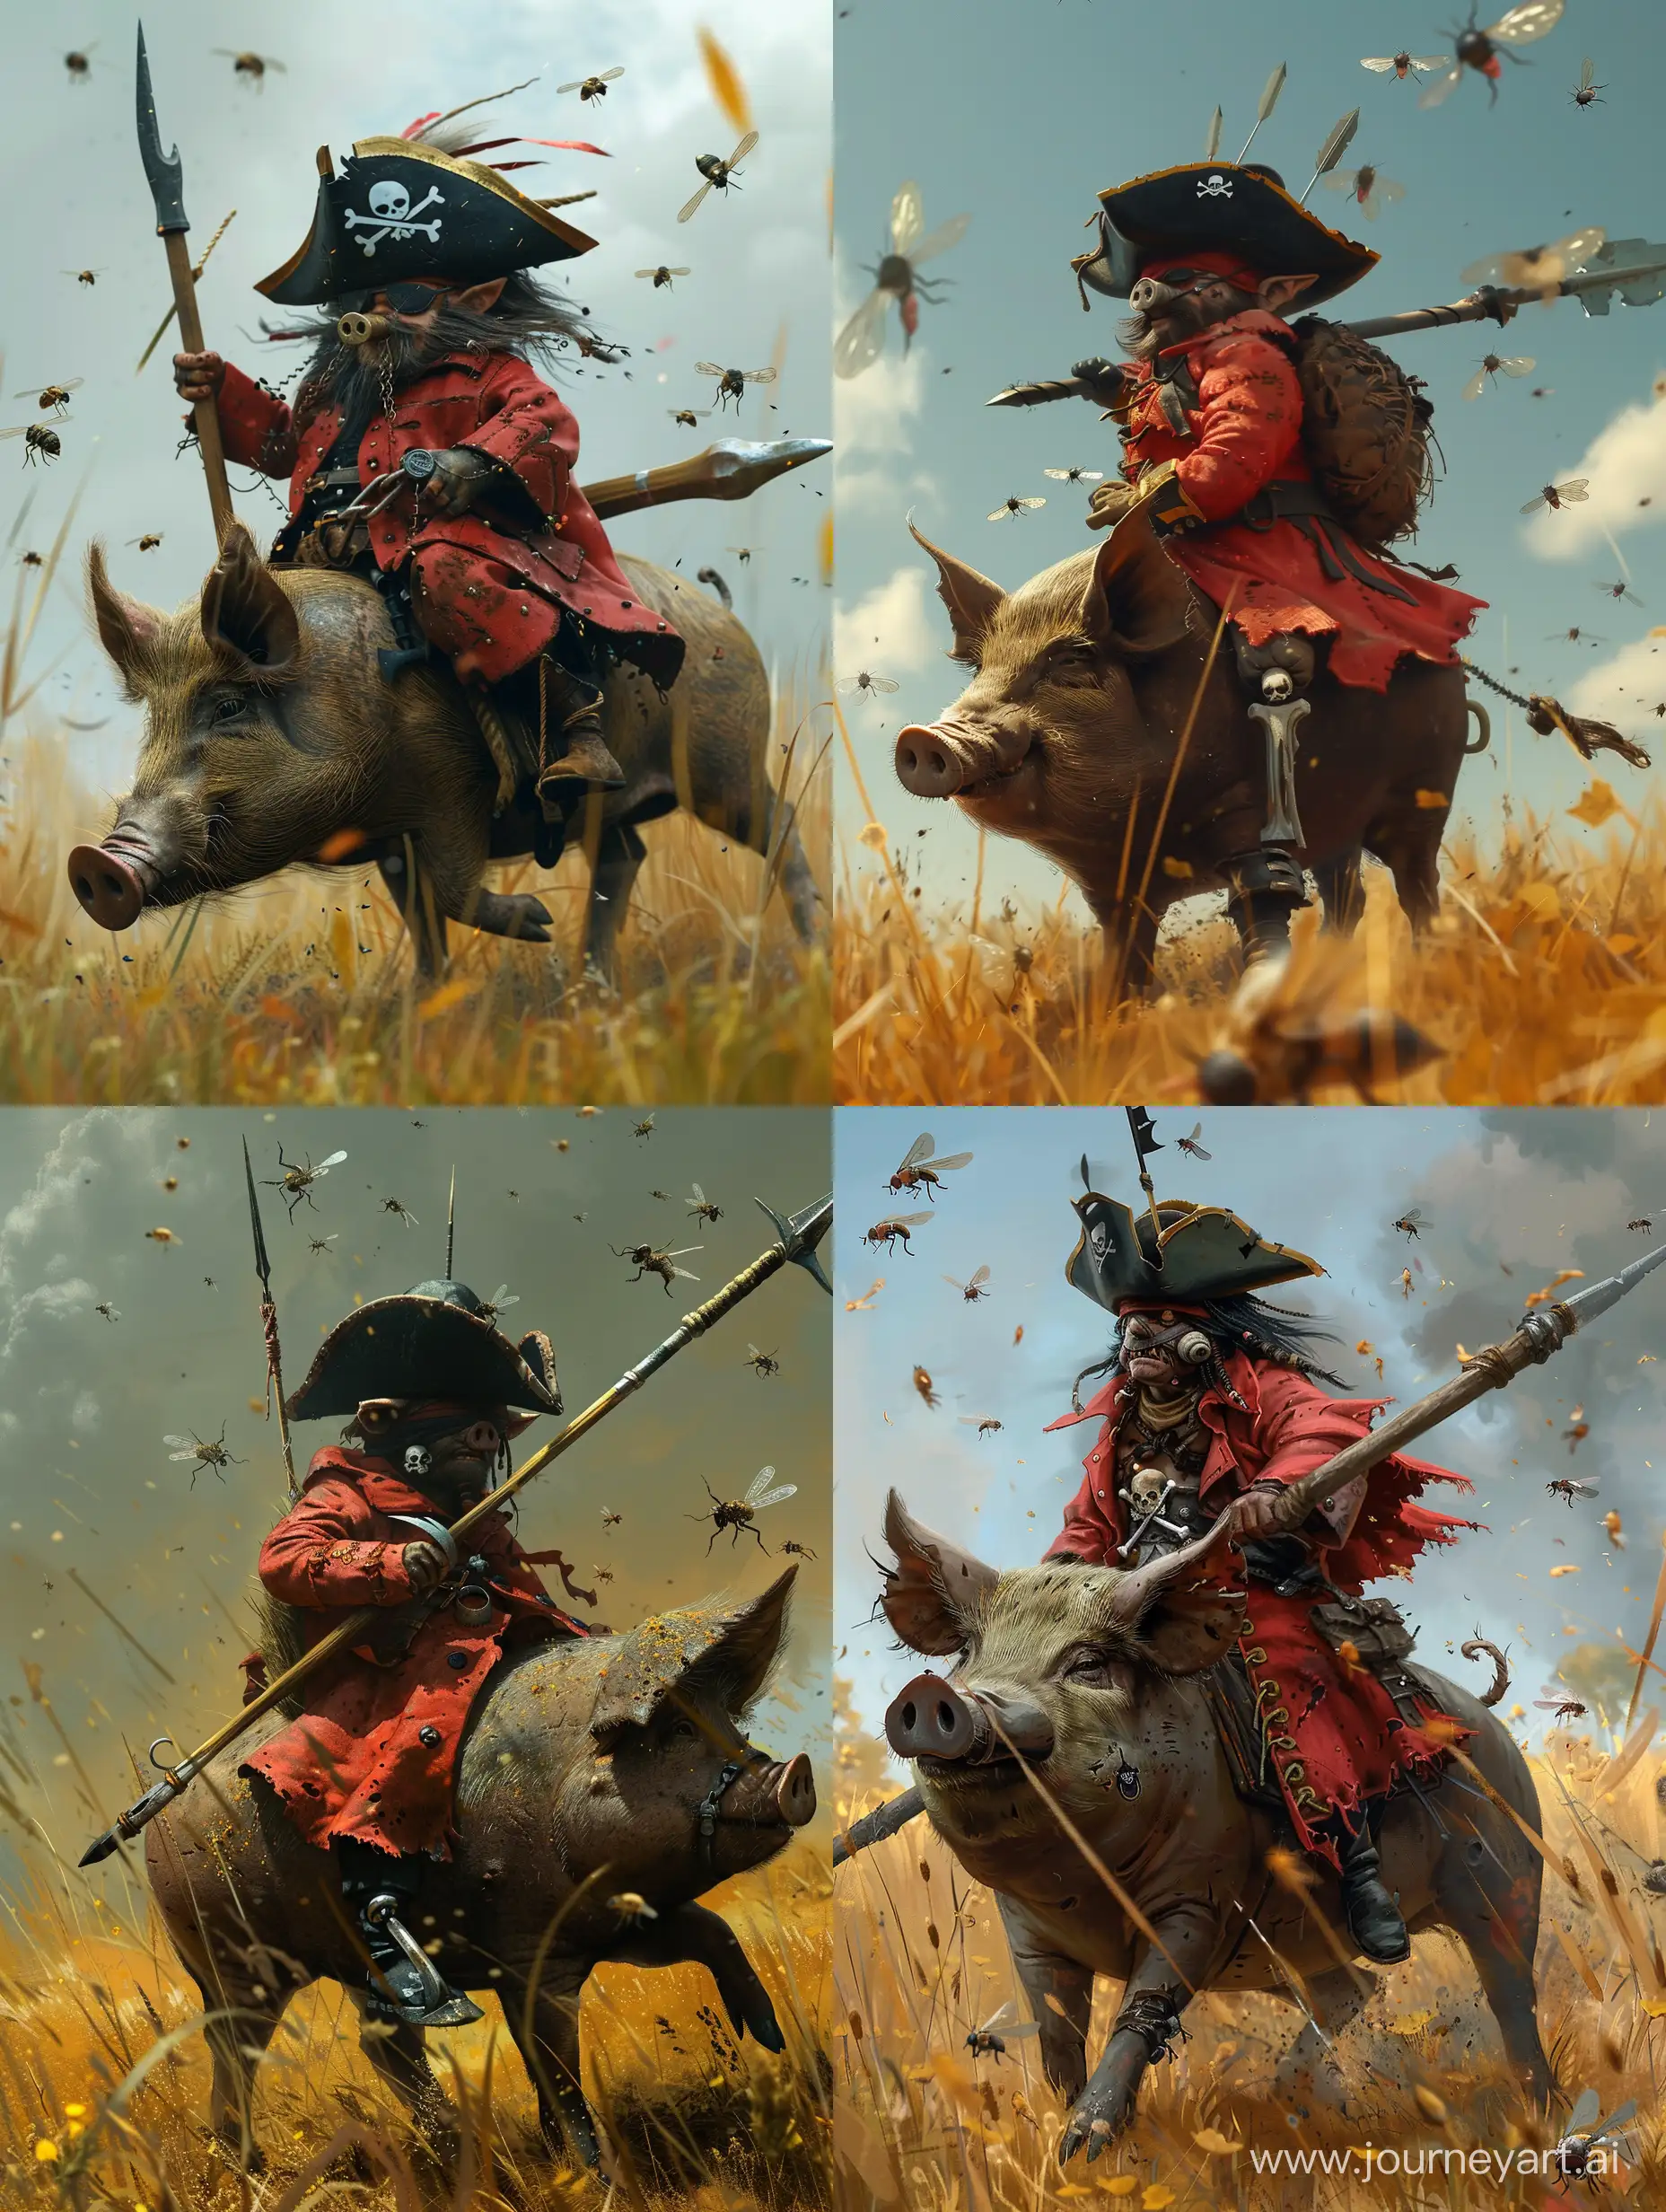 Small mean pirate hobbit riding a dirty pig in a field. Wearing oversized red coat and black pirate hat. 1 Peg leg. Holding a cutlass. Flies buzzing around him. Large spear on his back. 